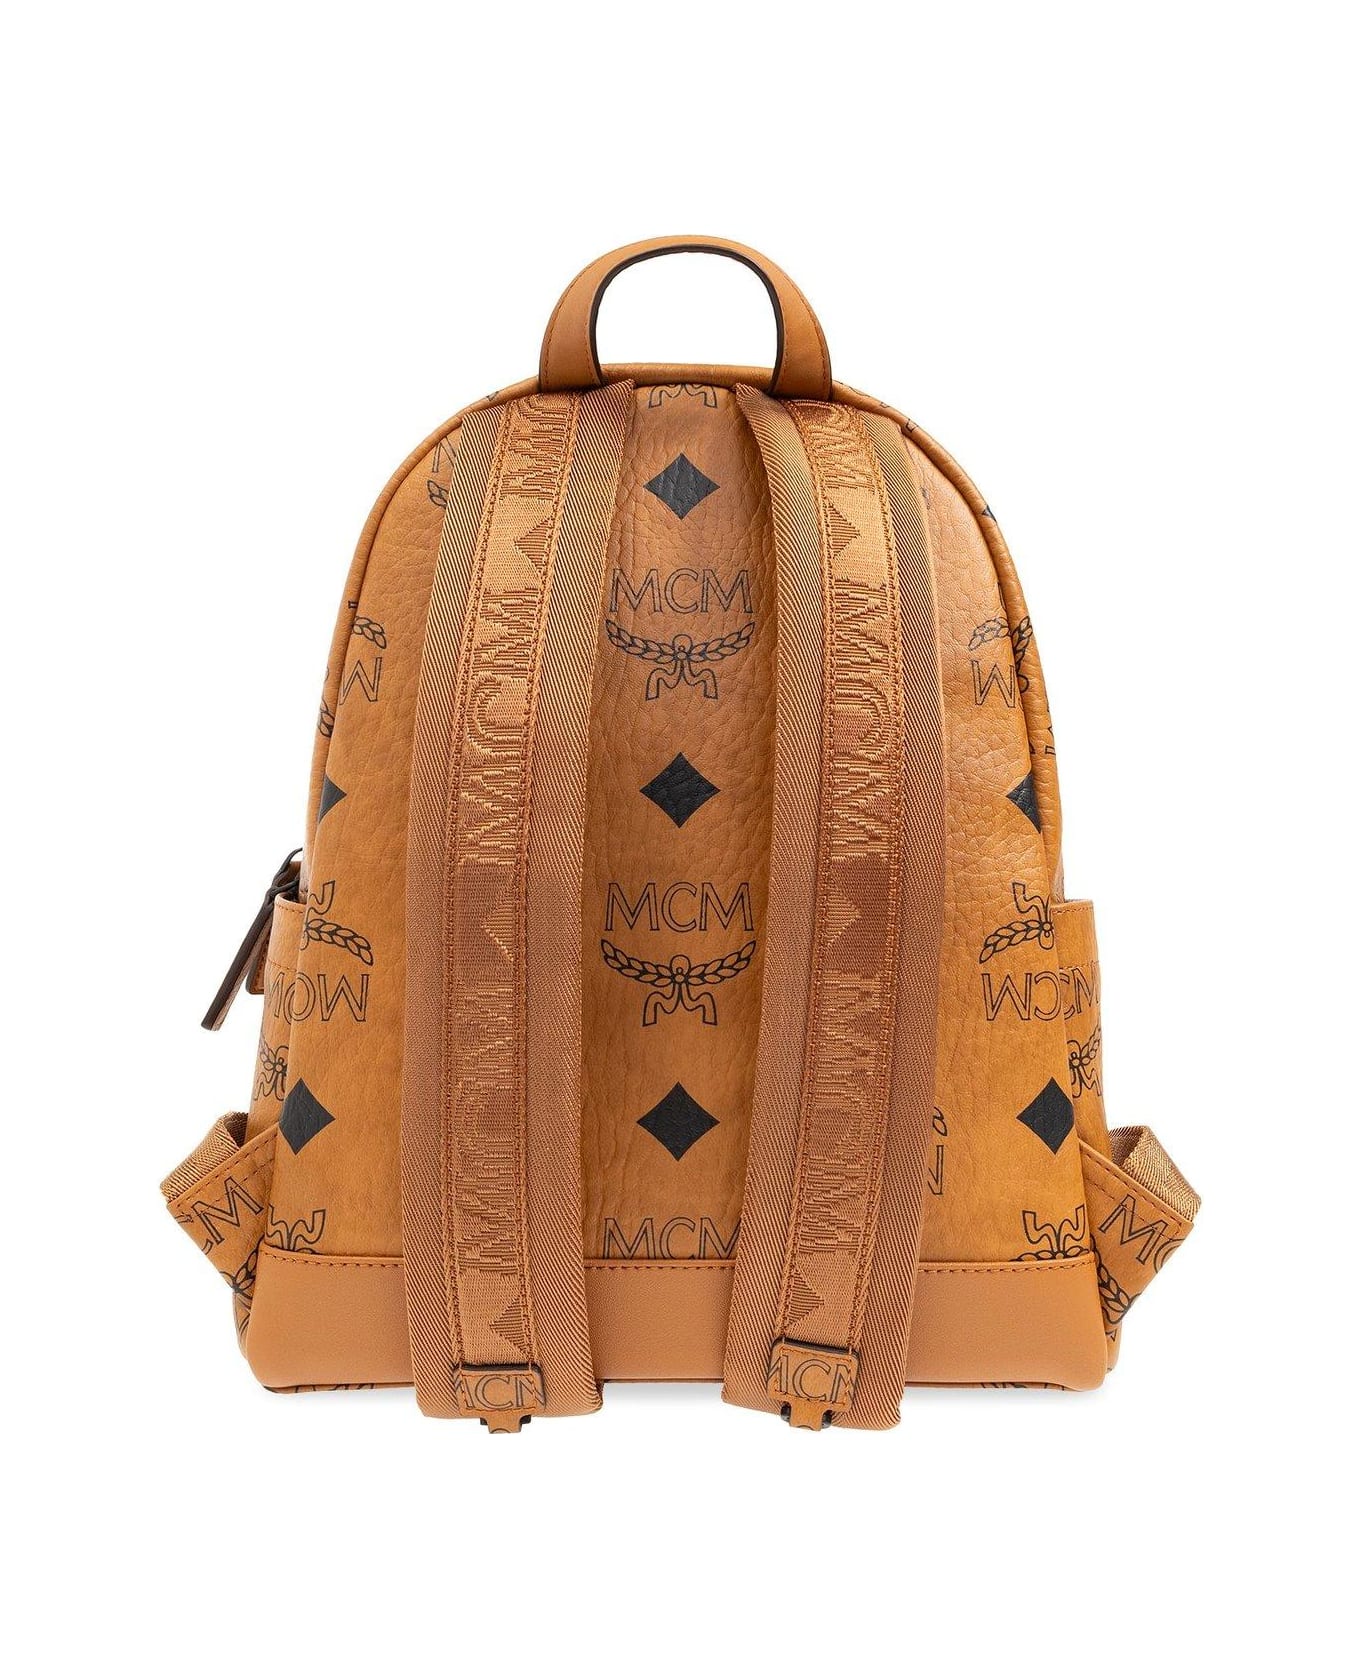 MCM All-over Logo Printed Zipped Backpack - BROWN/BLACK